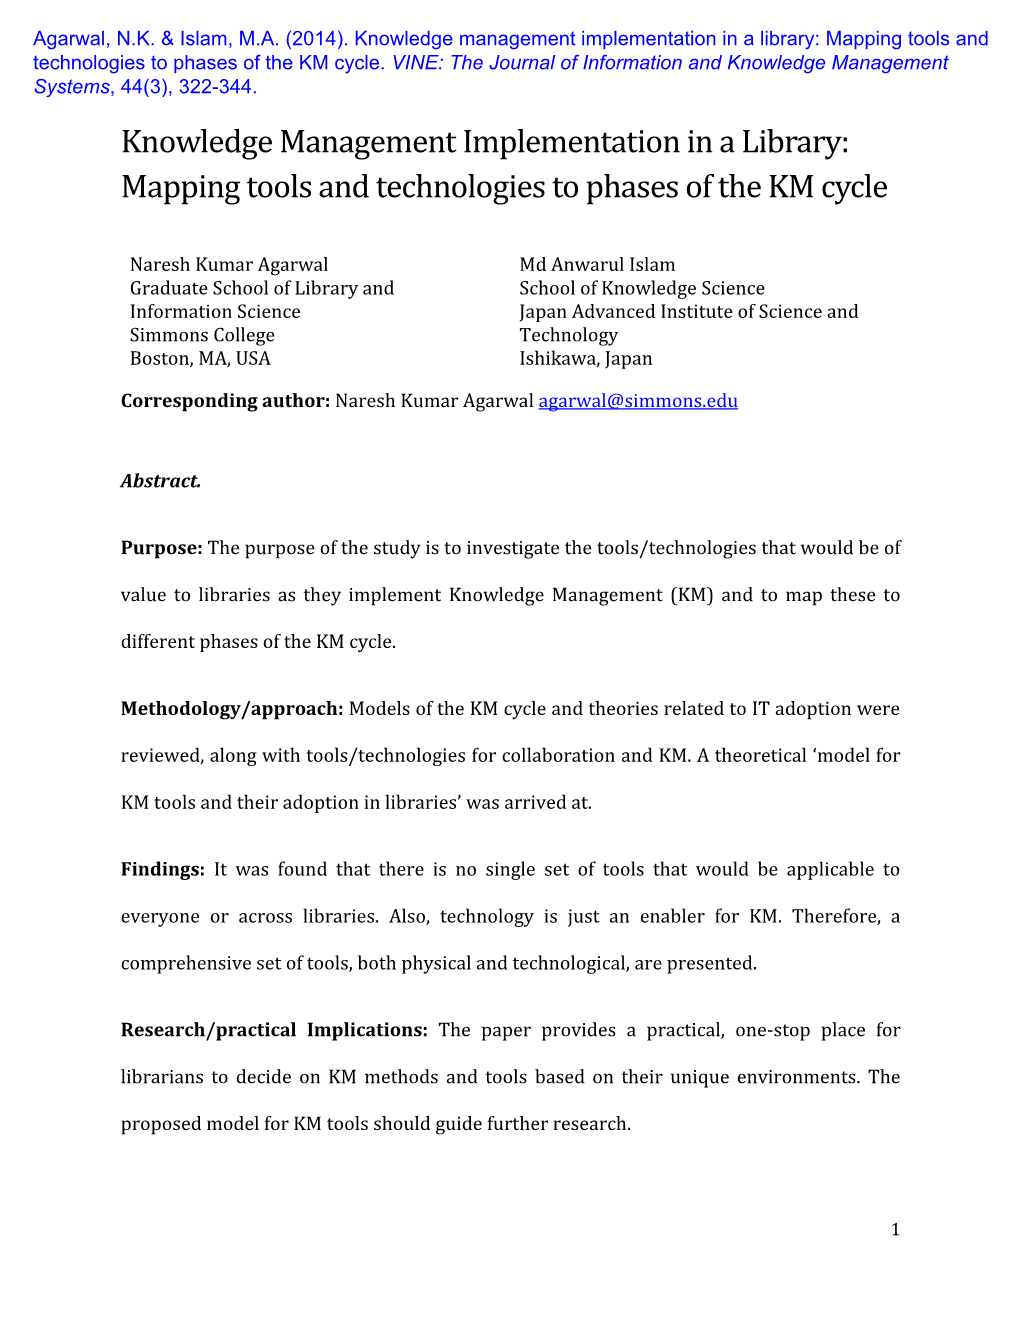 Knowledge Management Implementation in a Library: Mapping Tools and Technologies to Phases of the KM Cycle